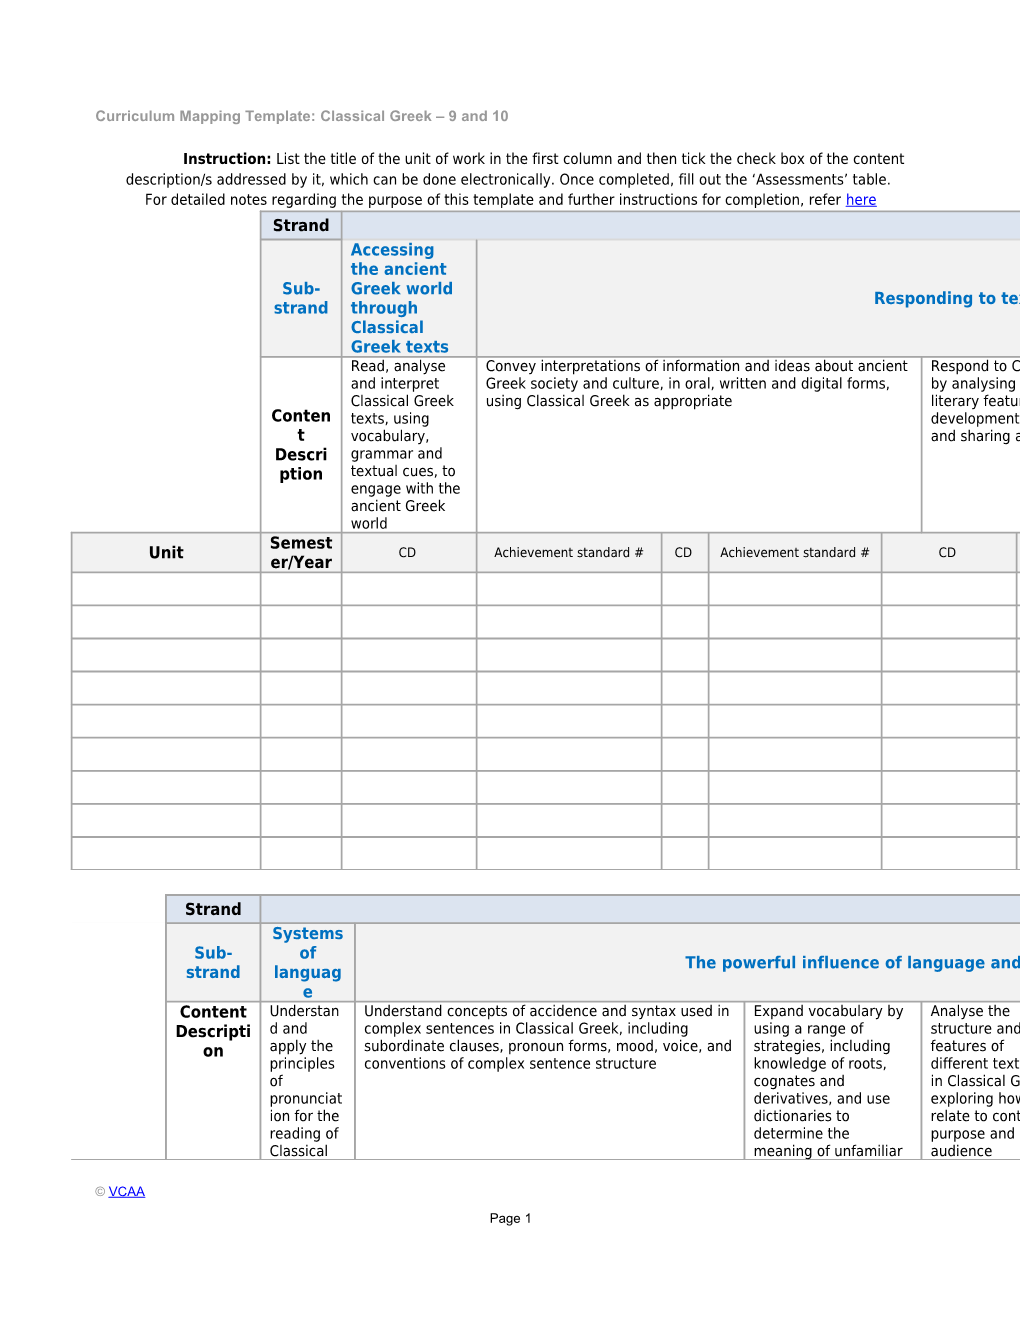 Curriculum Mapping Template: Classical Greek 9 and 10